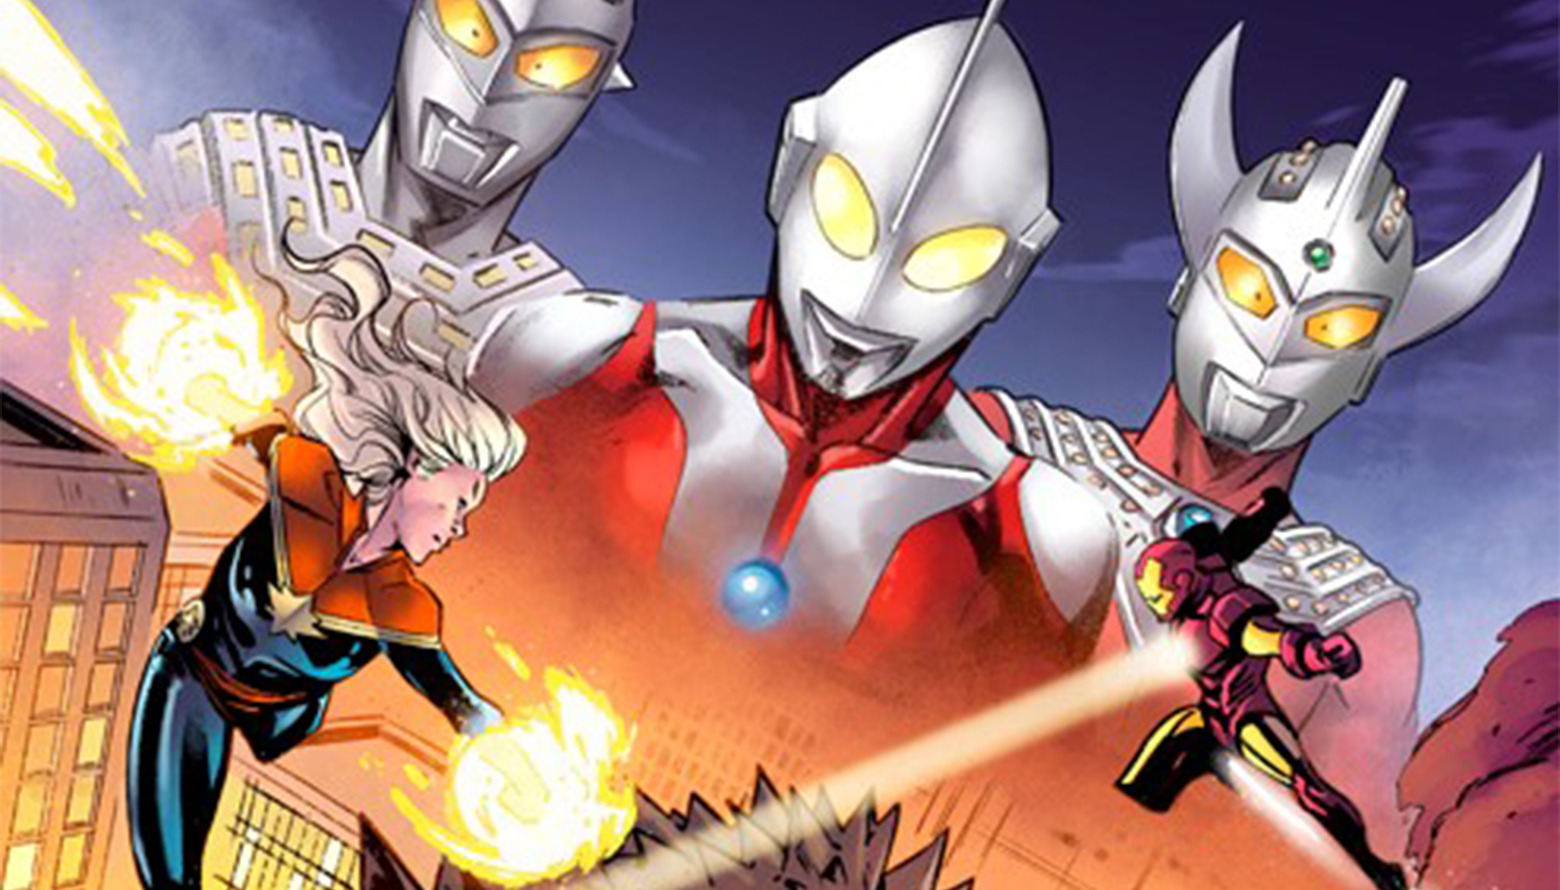 MARVEL SUPER HEROES WILL CROSSOVER WITH ULTRAMAN FOR THE FIRST TIME IN UPCOMING COMIC BOOK MINISERIES